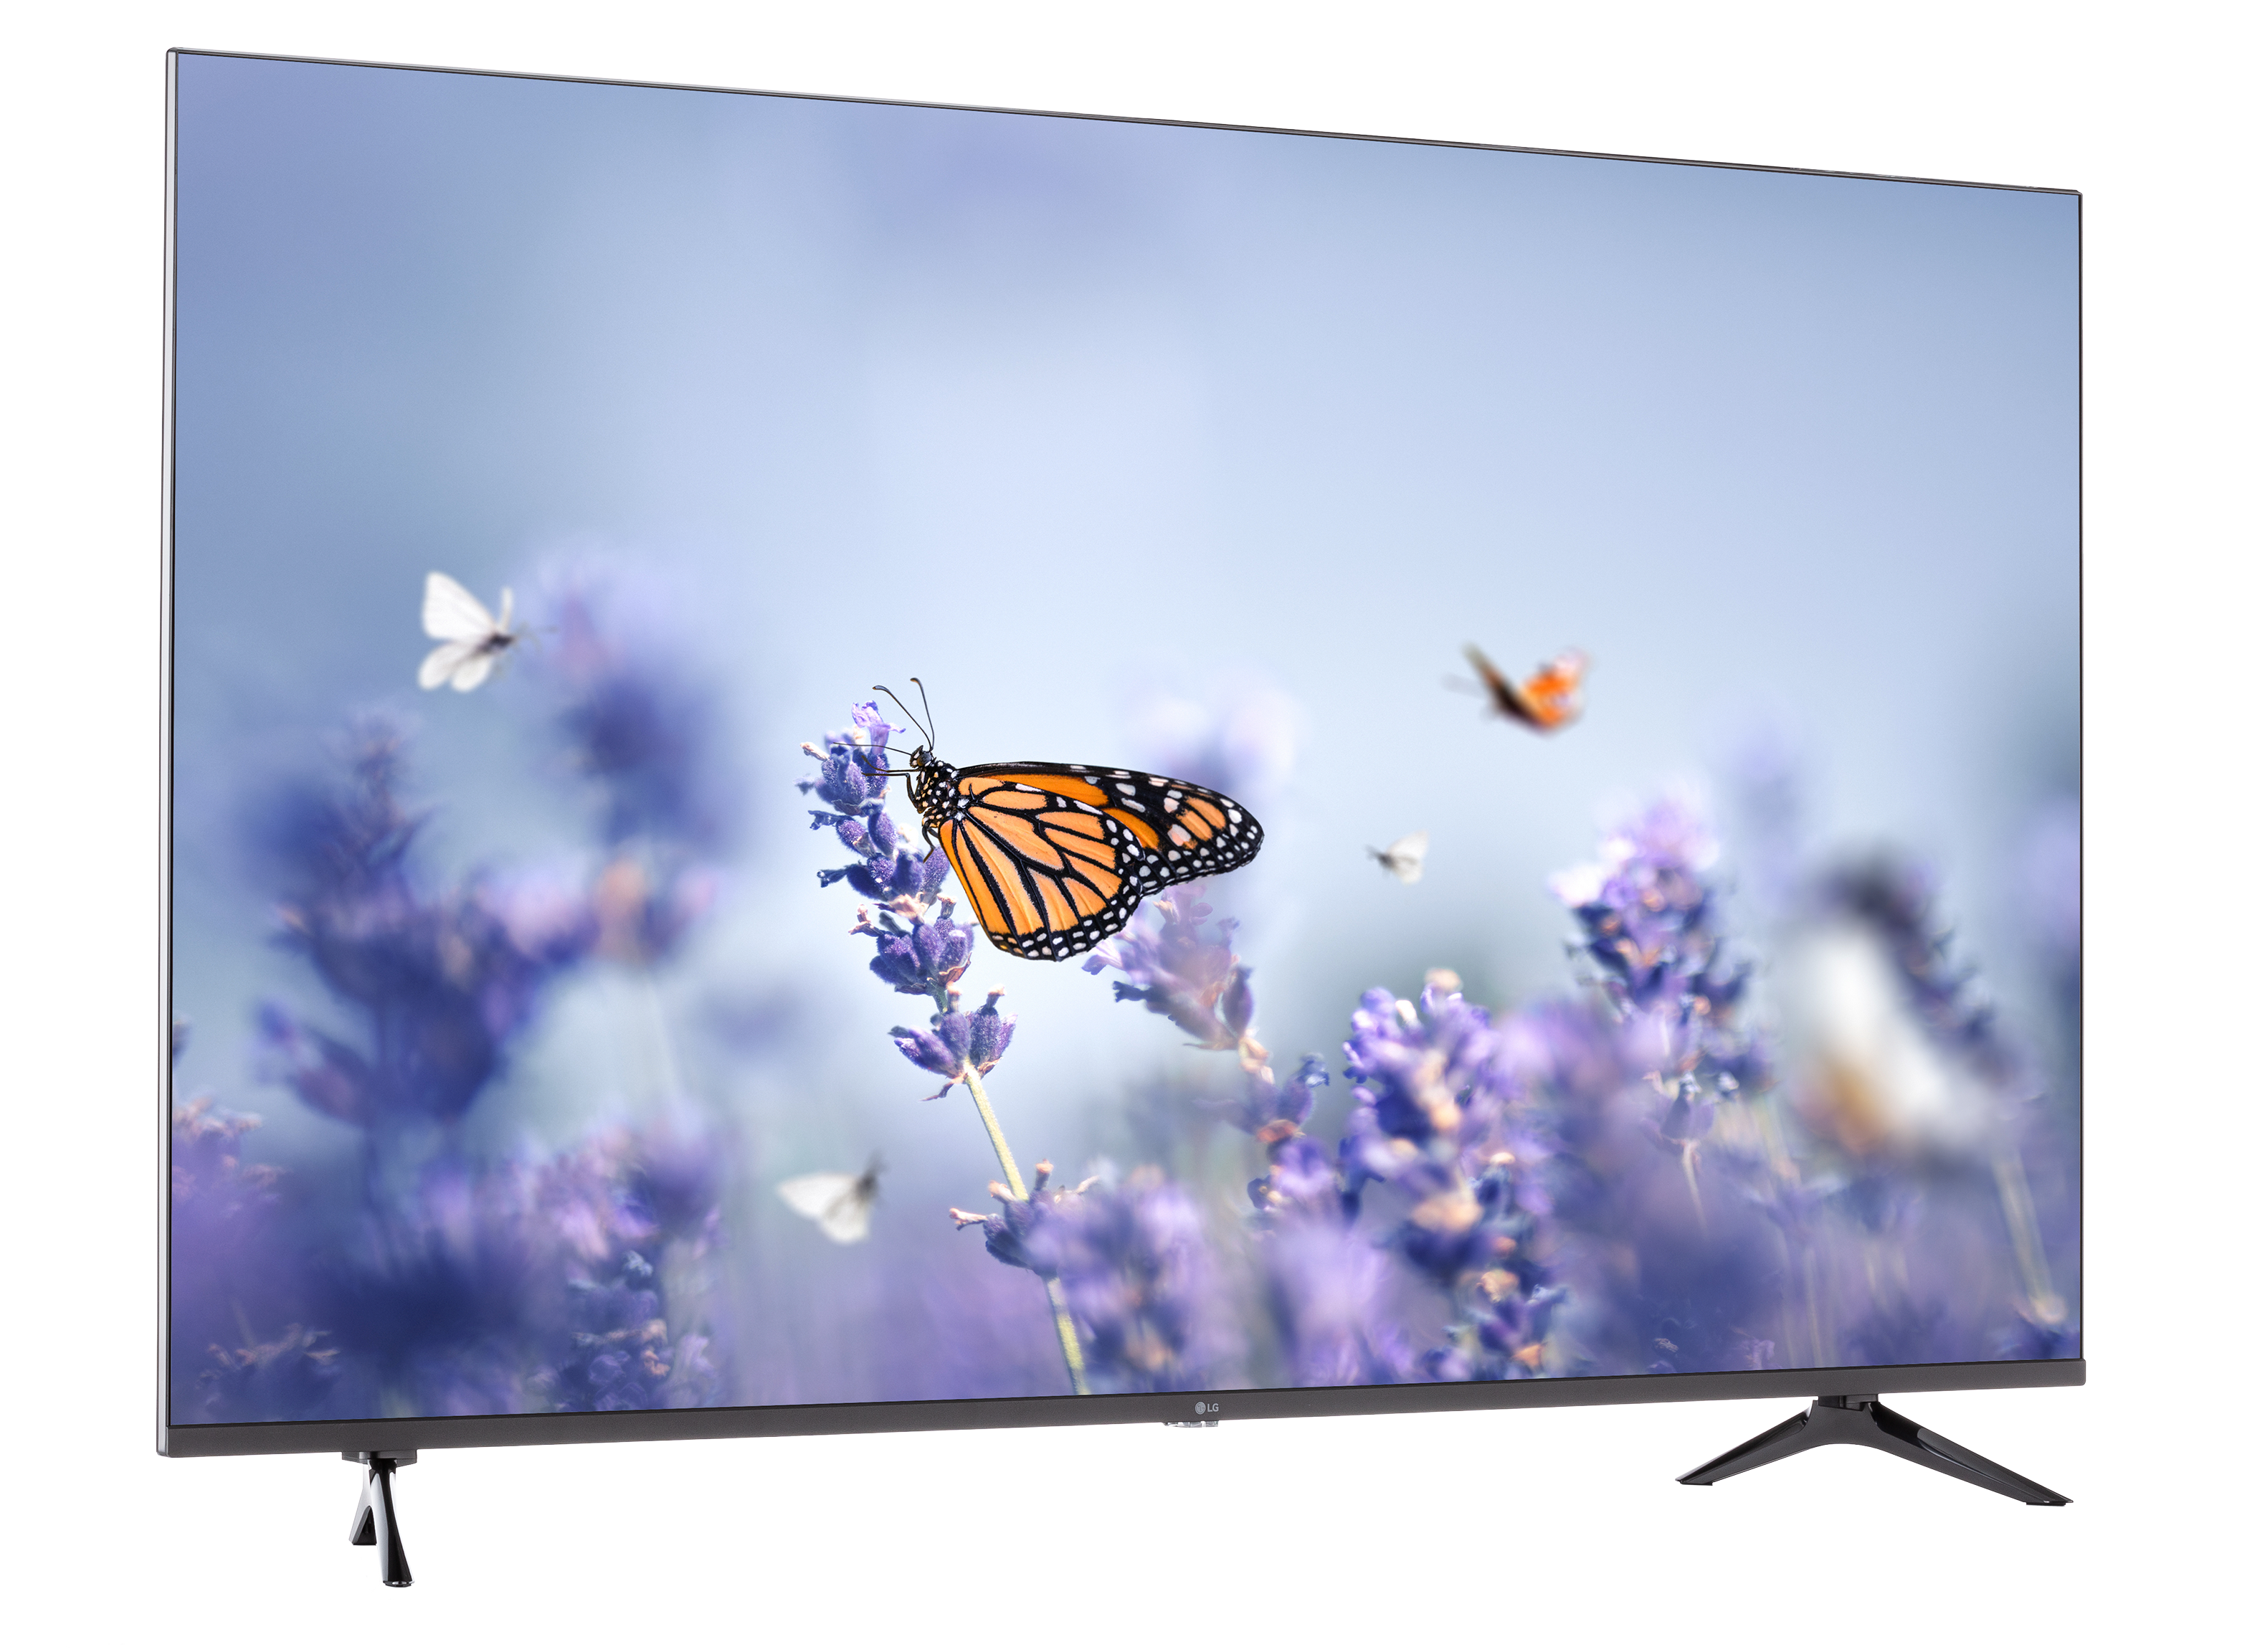 https://crdms.images.consumerreports.org/prod/products/cr/models/406624-55-to-60-inch-tvs-lg-55uq7570puj-10031910.png